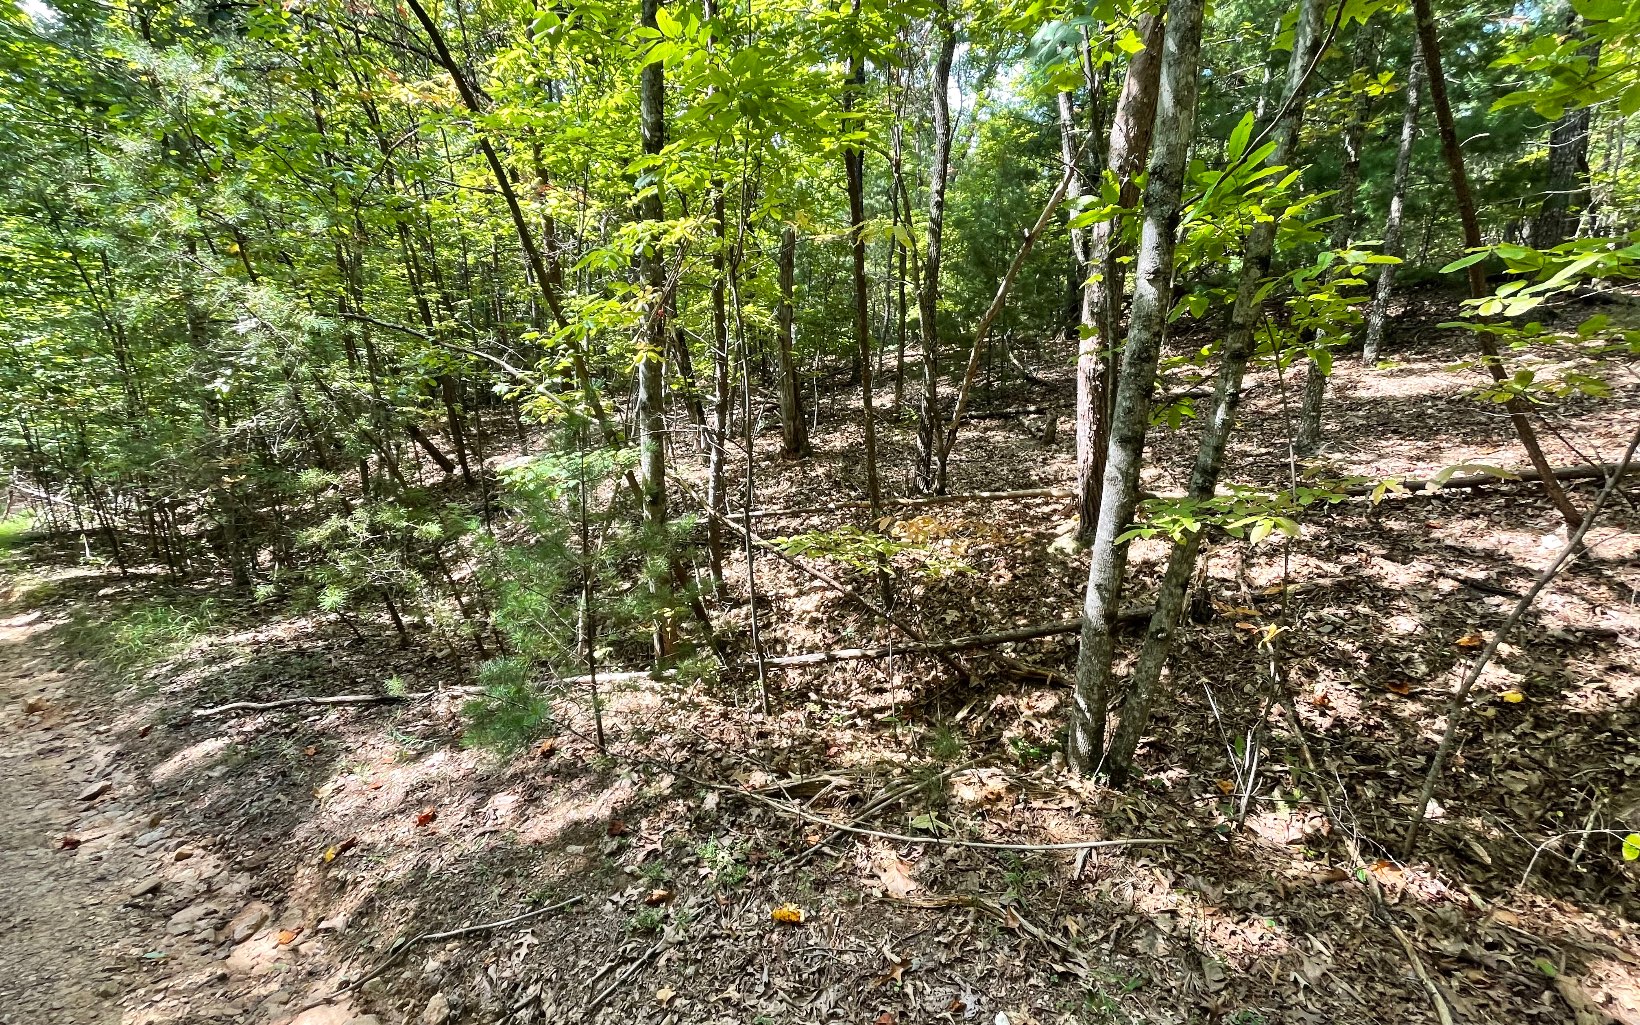 BEAUTIFULLY WOODED PRIVATE LOT IN THE NORTH GEORGIA MOUNTAINS! Come build your private mountain getaway on this 2+ acre lot in the mountains of North Georgia.